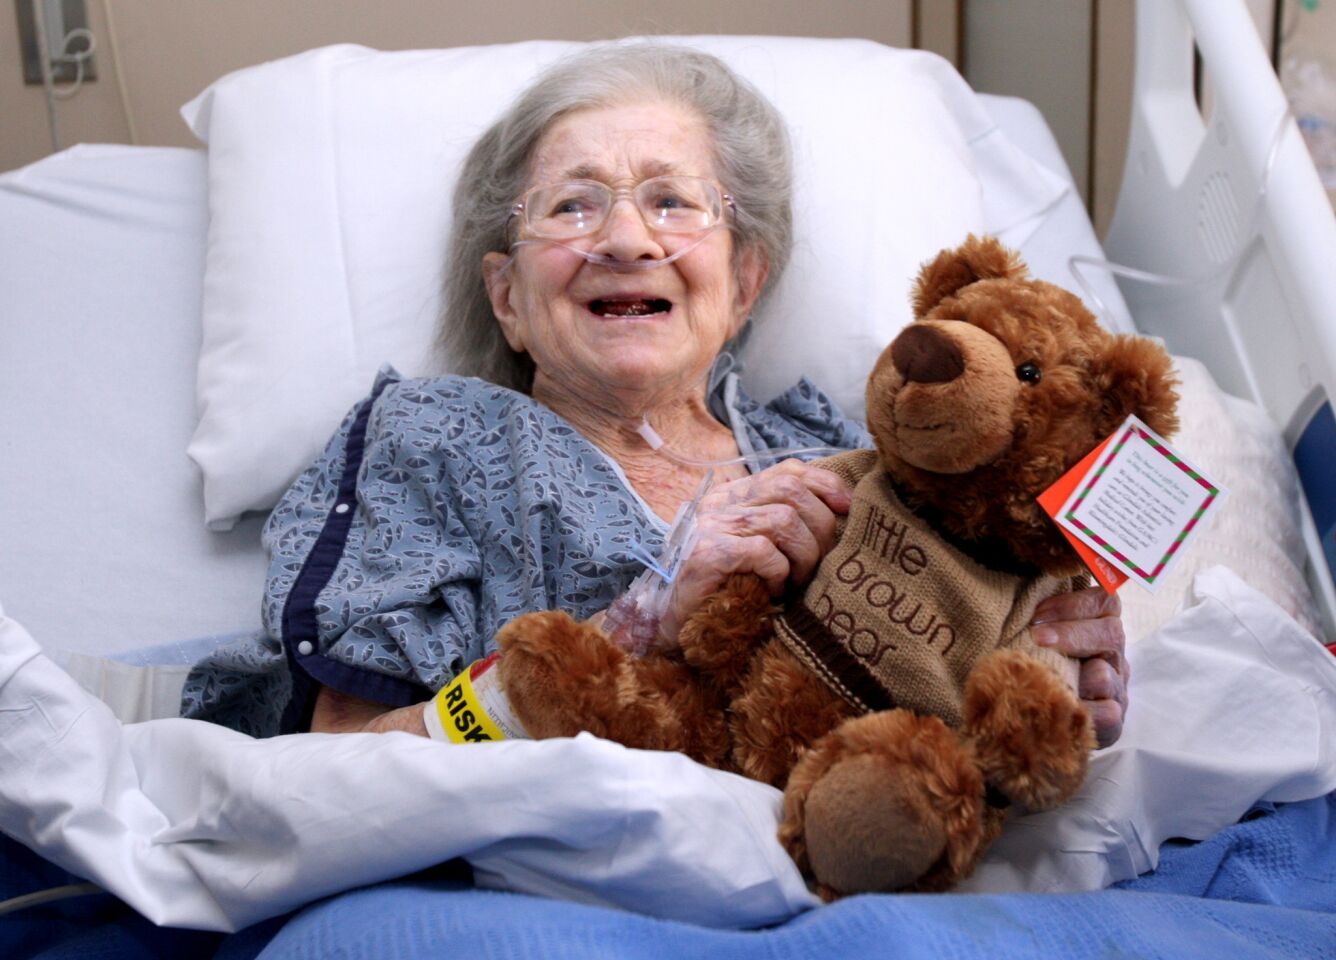 Glendale Adventist Medical Center staff presented patient Janet Jones with a teddy bear for the holidays, at GAMC in Glendale on Wednesday, December 23, 2015. Jones jokingly said she has a cat as big as this teddy bear. Sixty stuffed bears were handed out to patients throughout the hospital. A donor gave 30 bears and Bloomingdale's match the gift with another 30 bears.